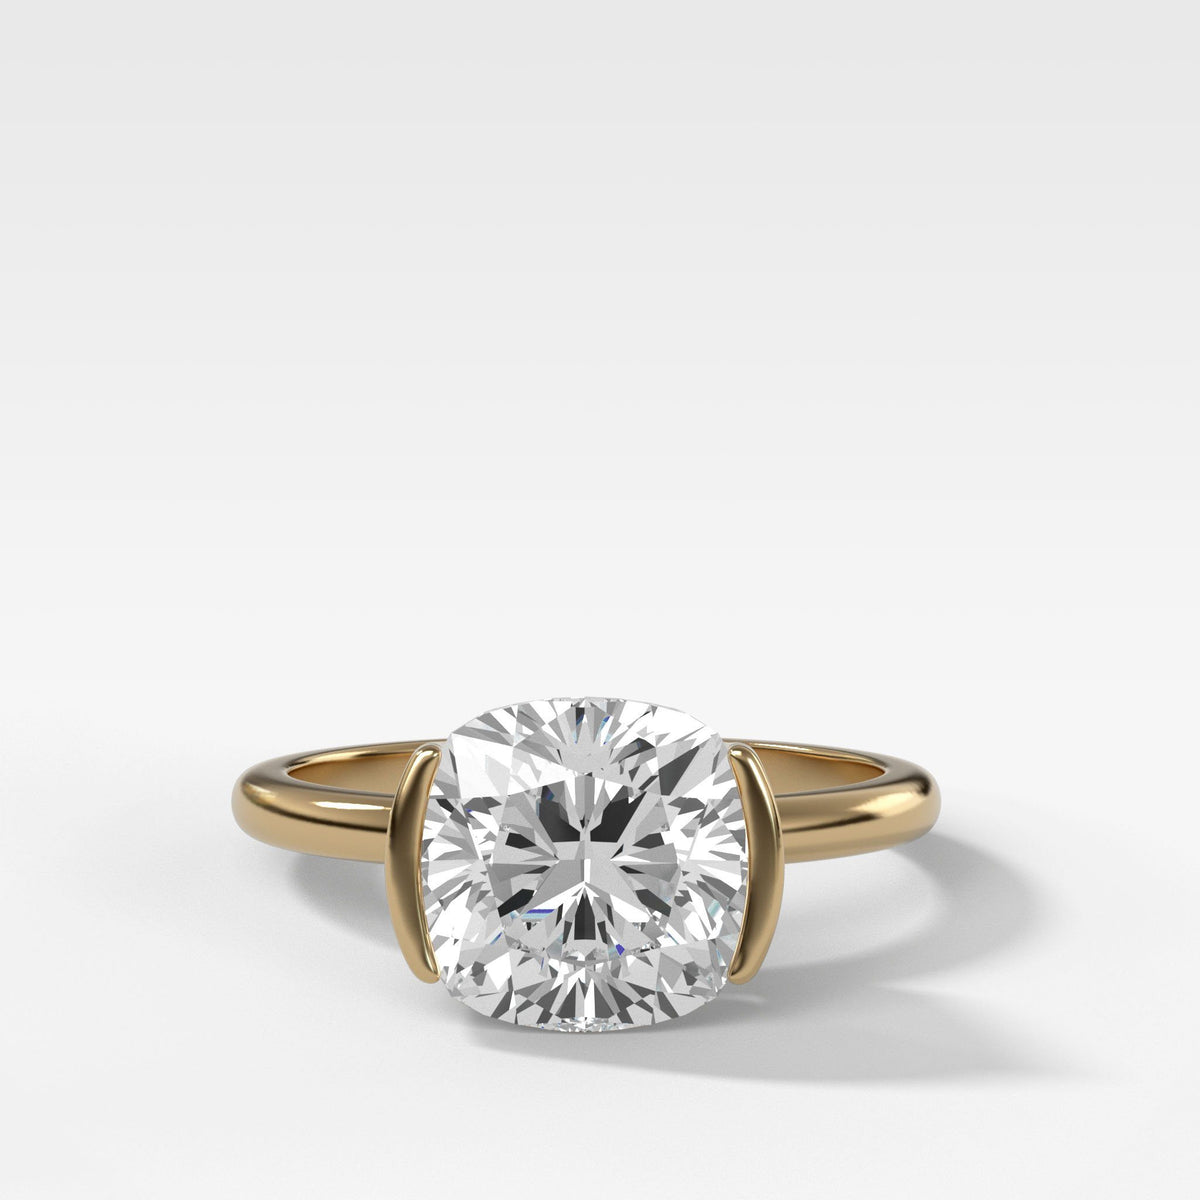 Half Bezel Solitaire Engagement Ring With Cushion Cut by Good Stone in Yellow Gold